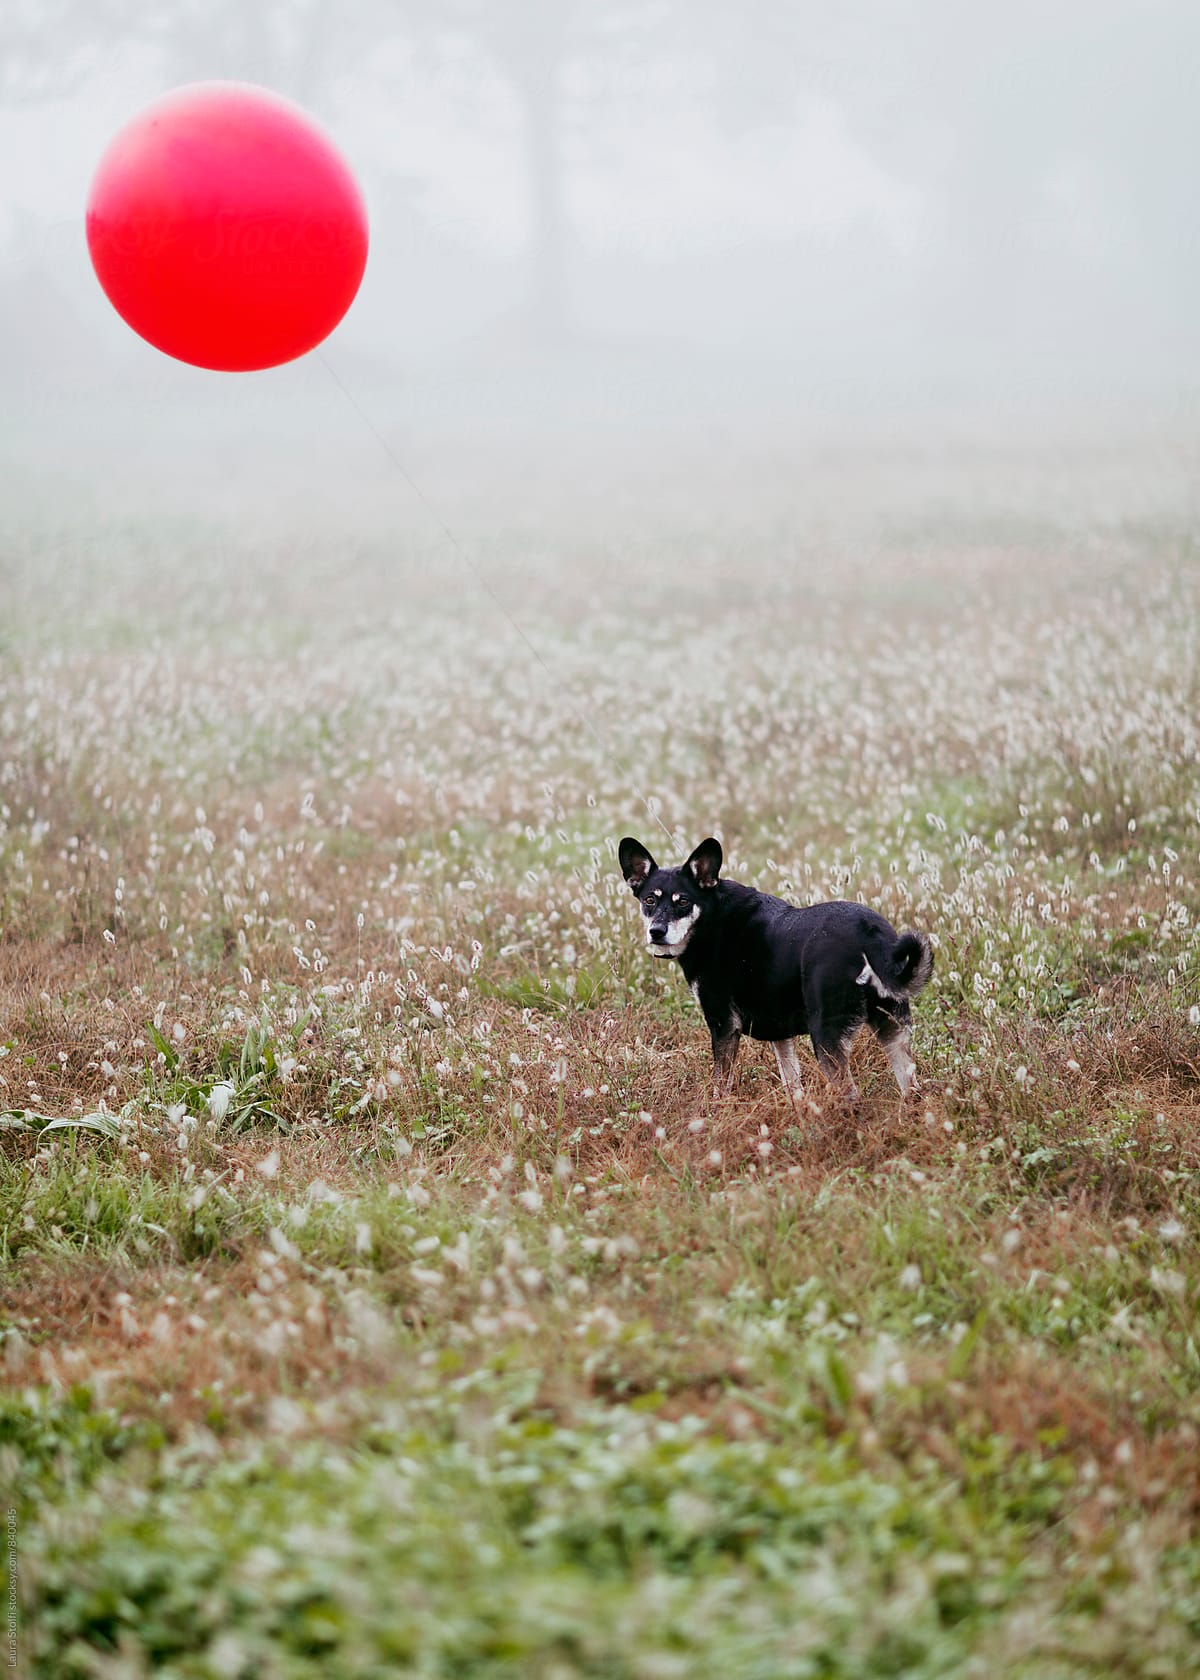 Little dog with red balloon floating above her in foggy field